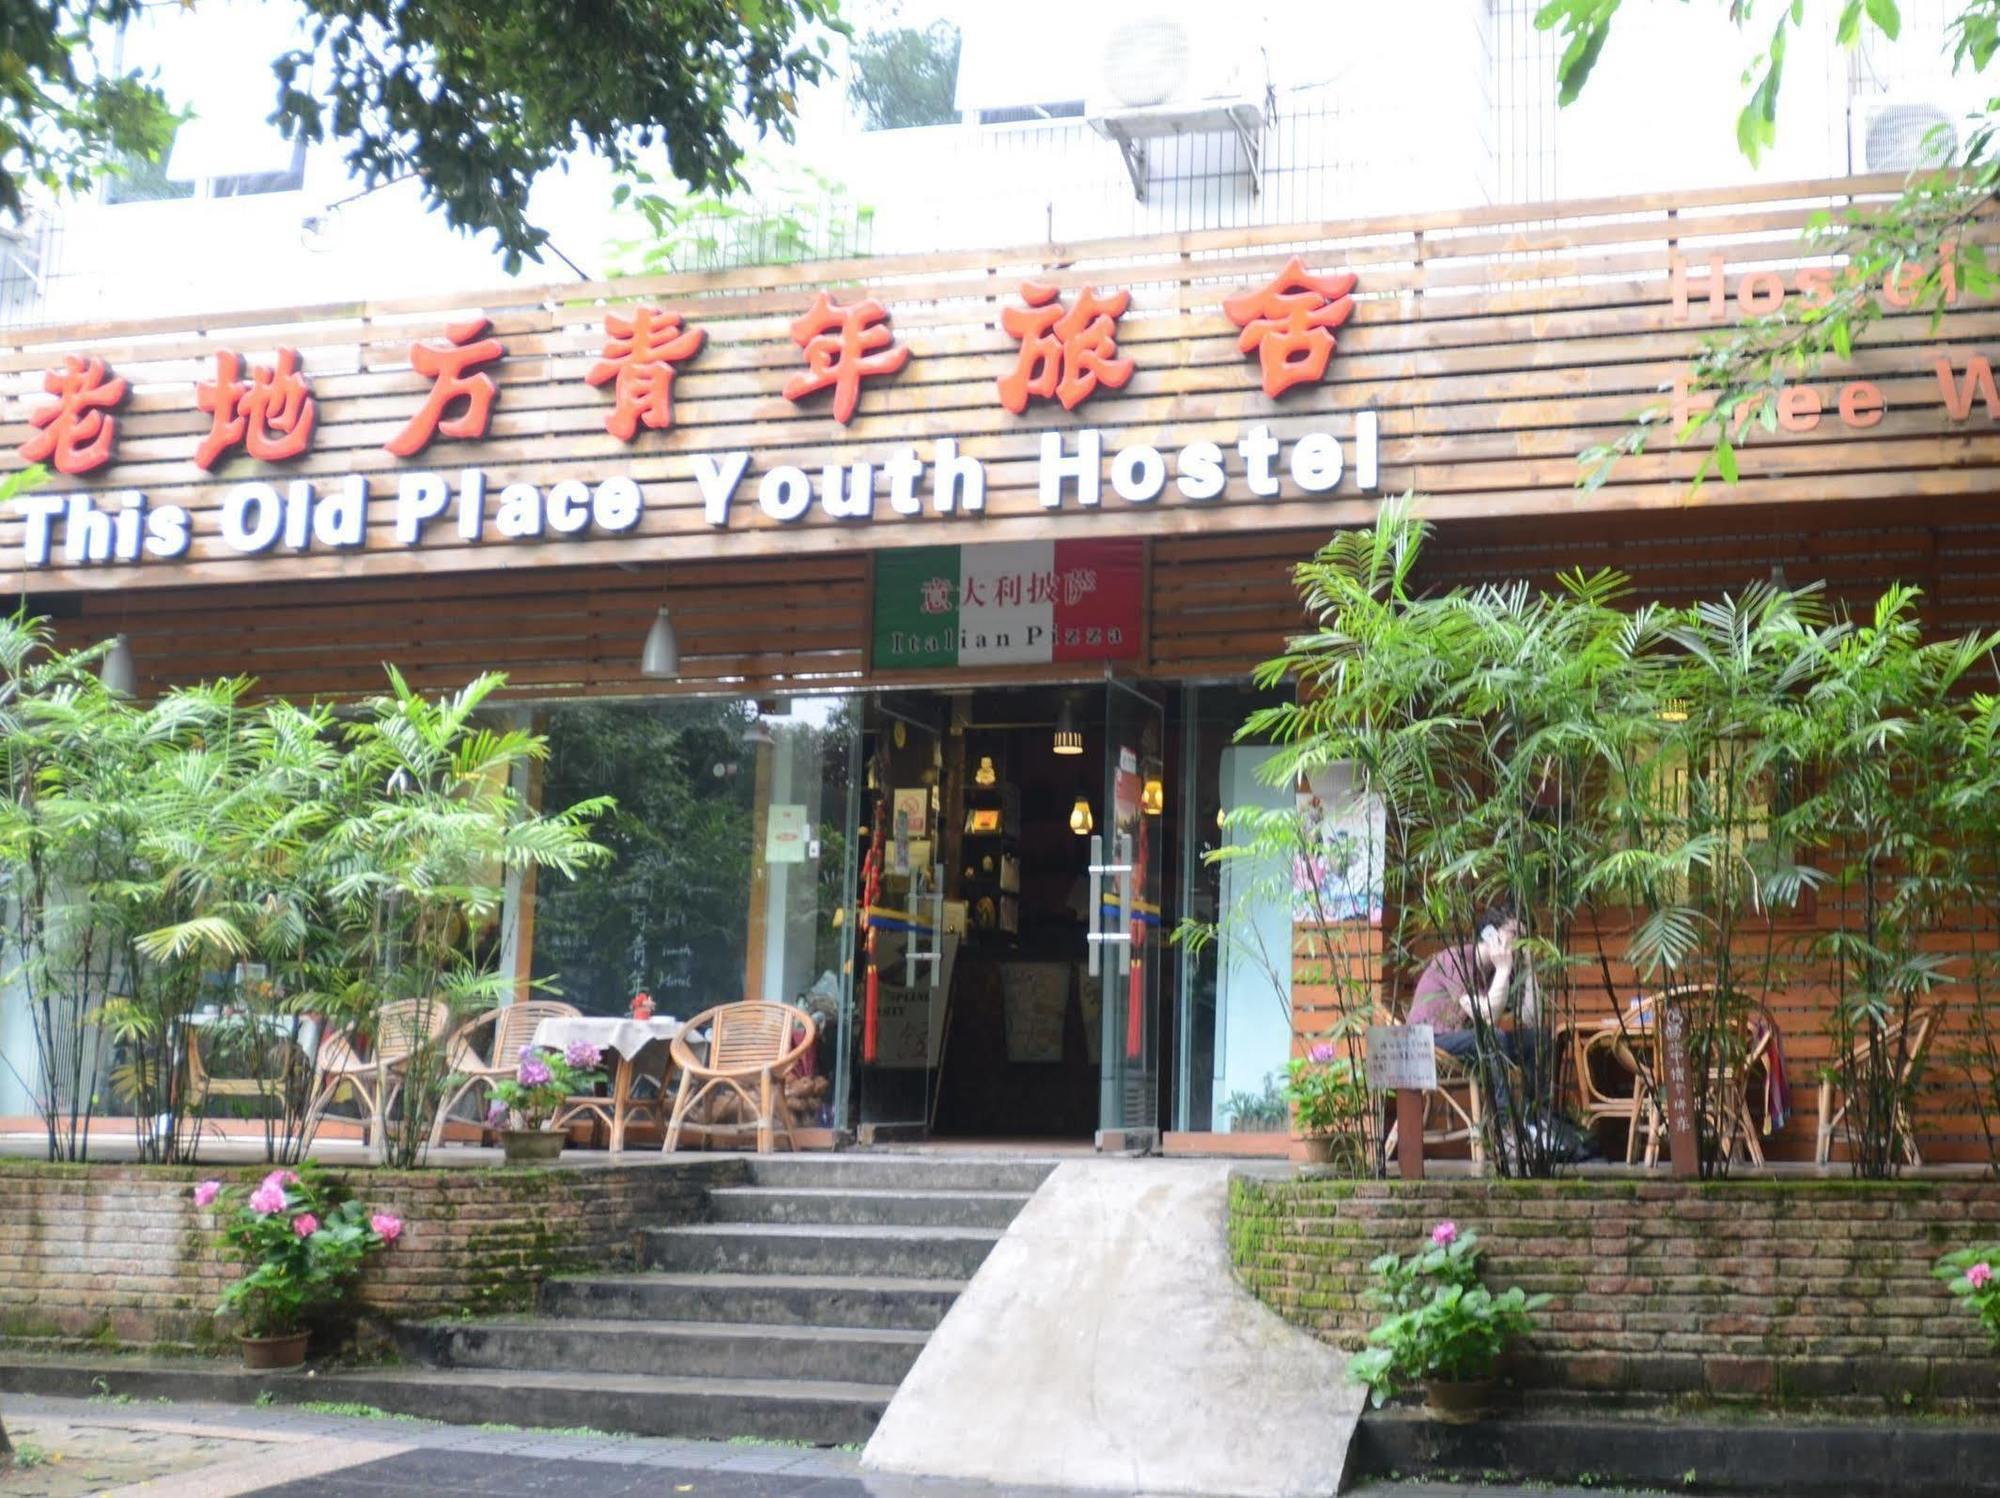 Guilin This Old Place Intl Youth Hostel Exterior foto